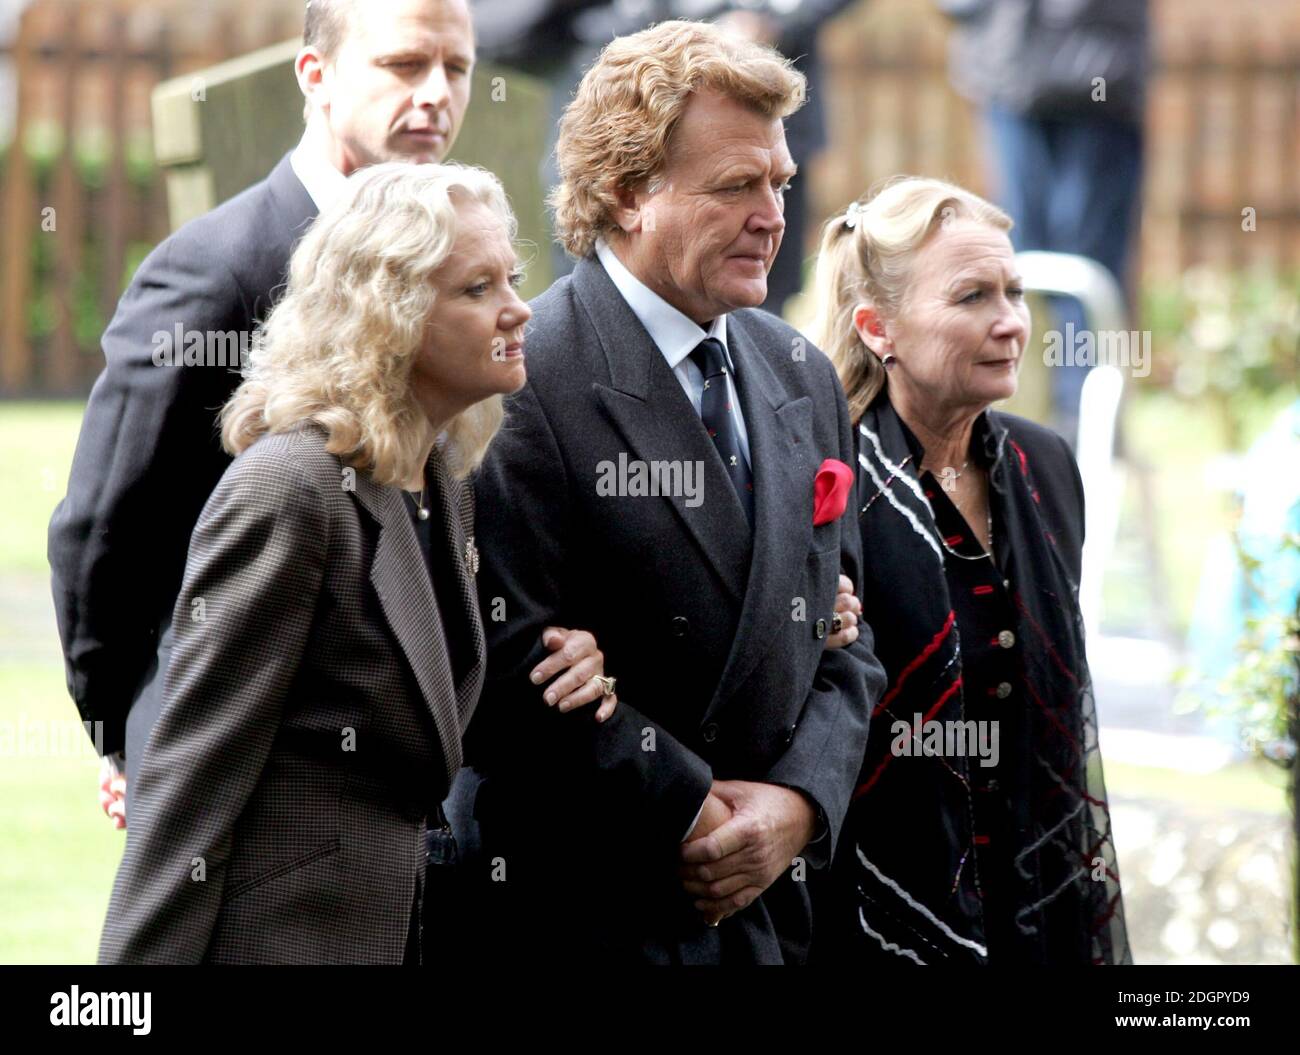 Hayley Mills (left) Jonathan Mills (centre) and Juliet Mills (right) attending the funeral of their actor father Sir John Mills in St Mary's Church, Denham, Buckinghamshire. Doug Peters/allactiondigital.com  Stock Photo